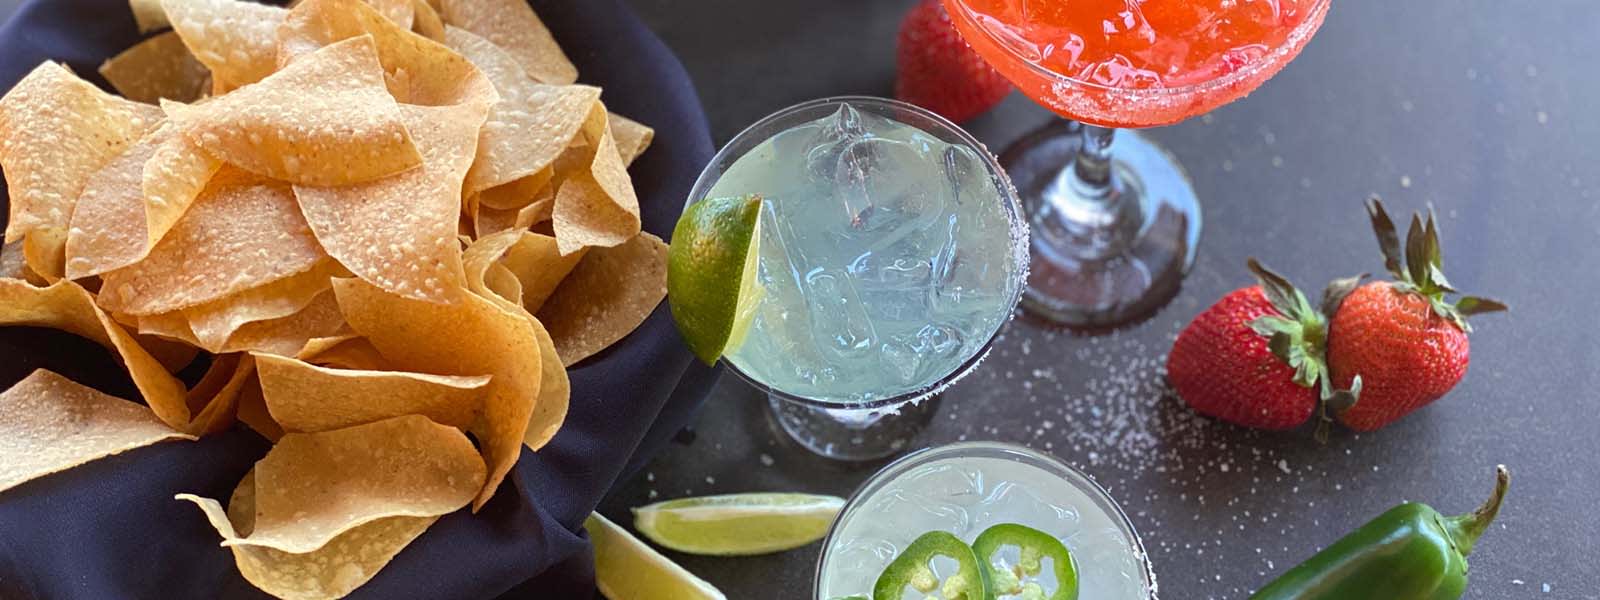 Chips and three margaritas on a table